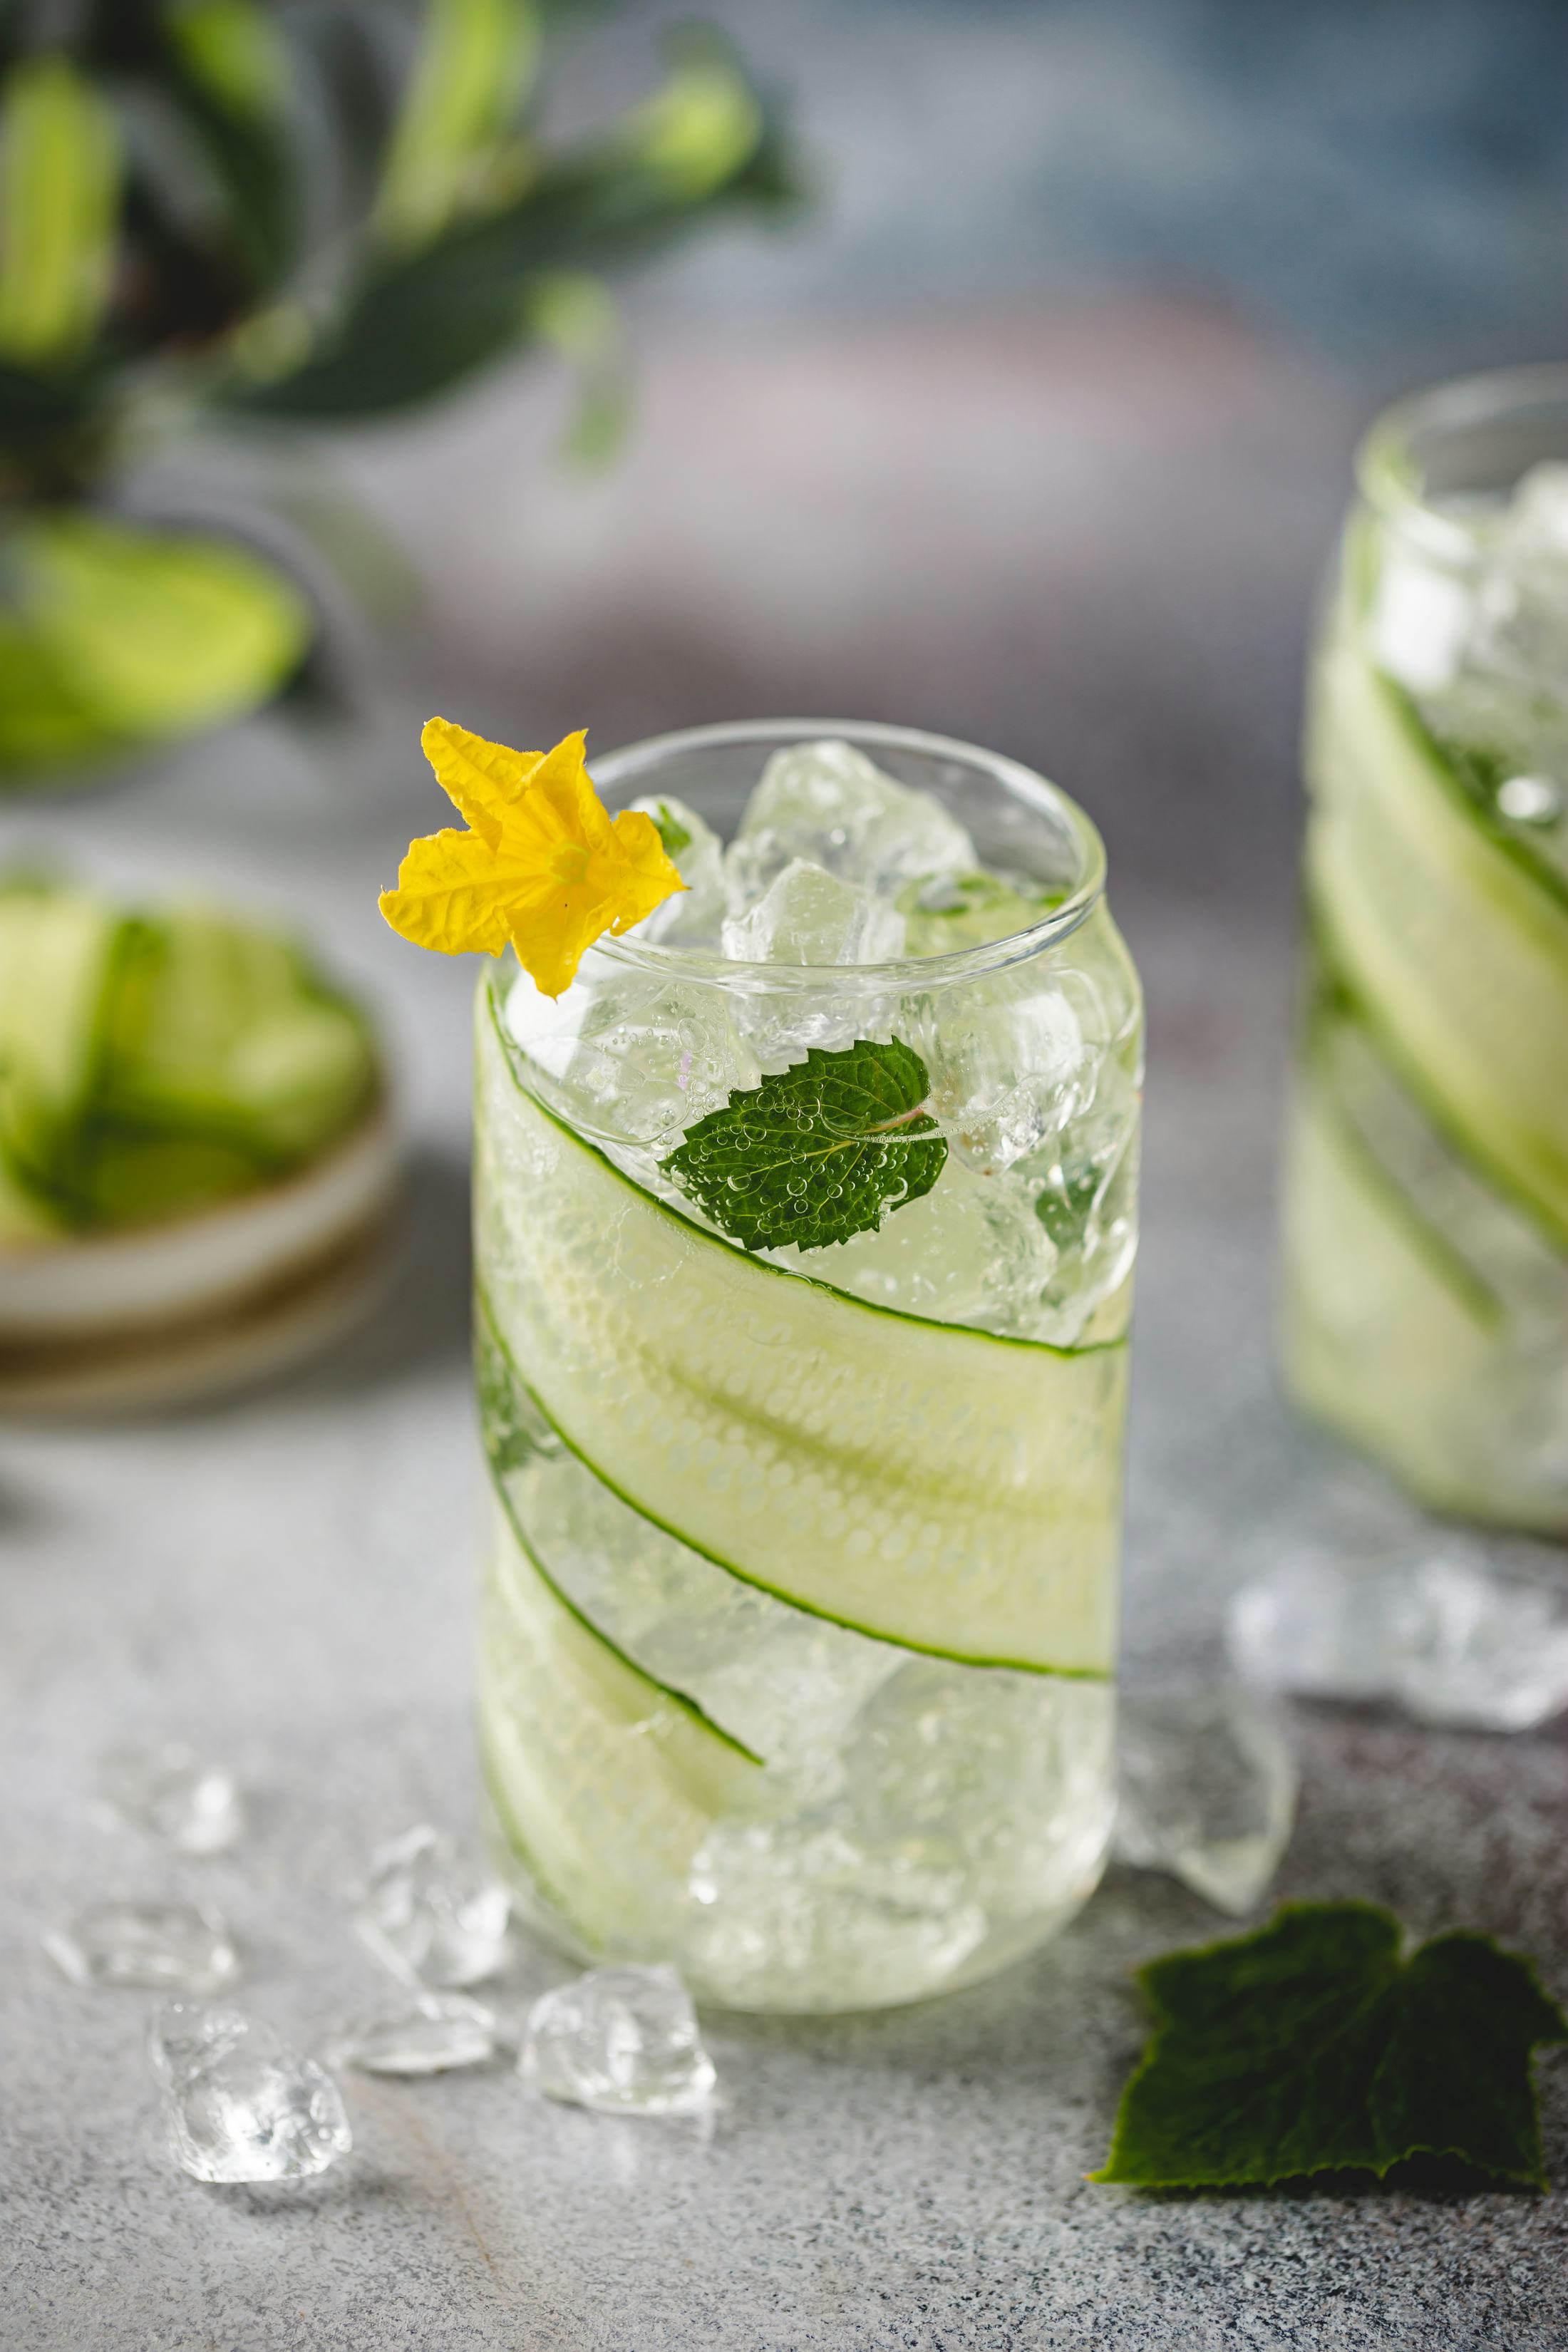 11 Cucumber Recipes That Are Bright & Refreshing